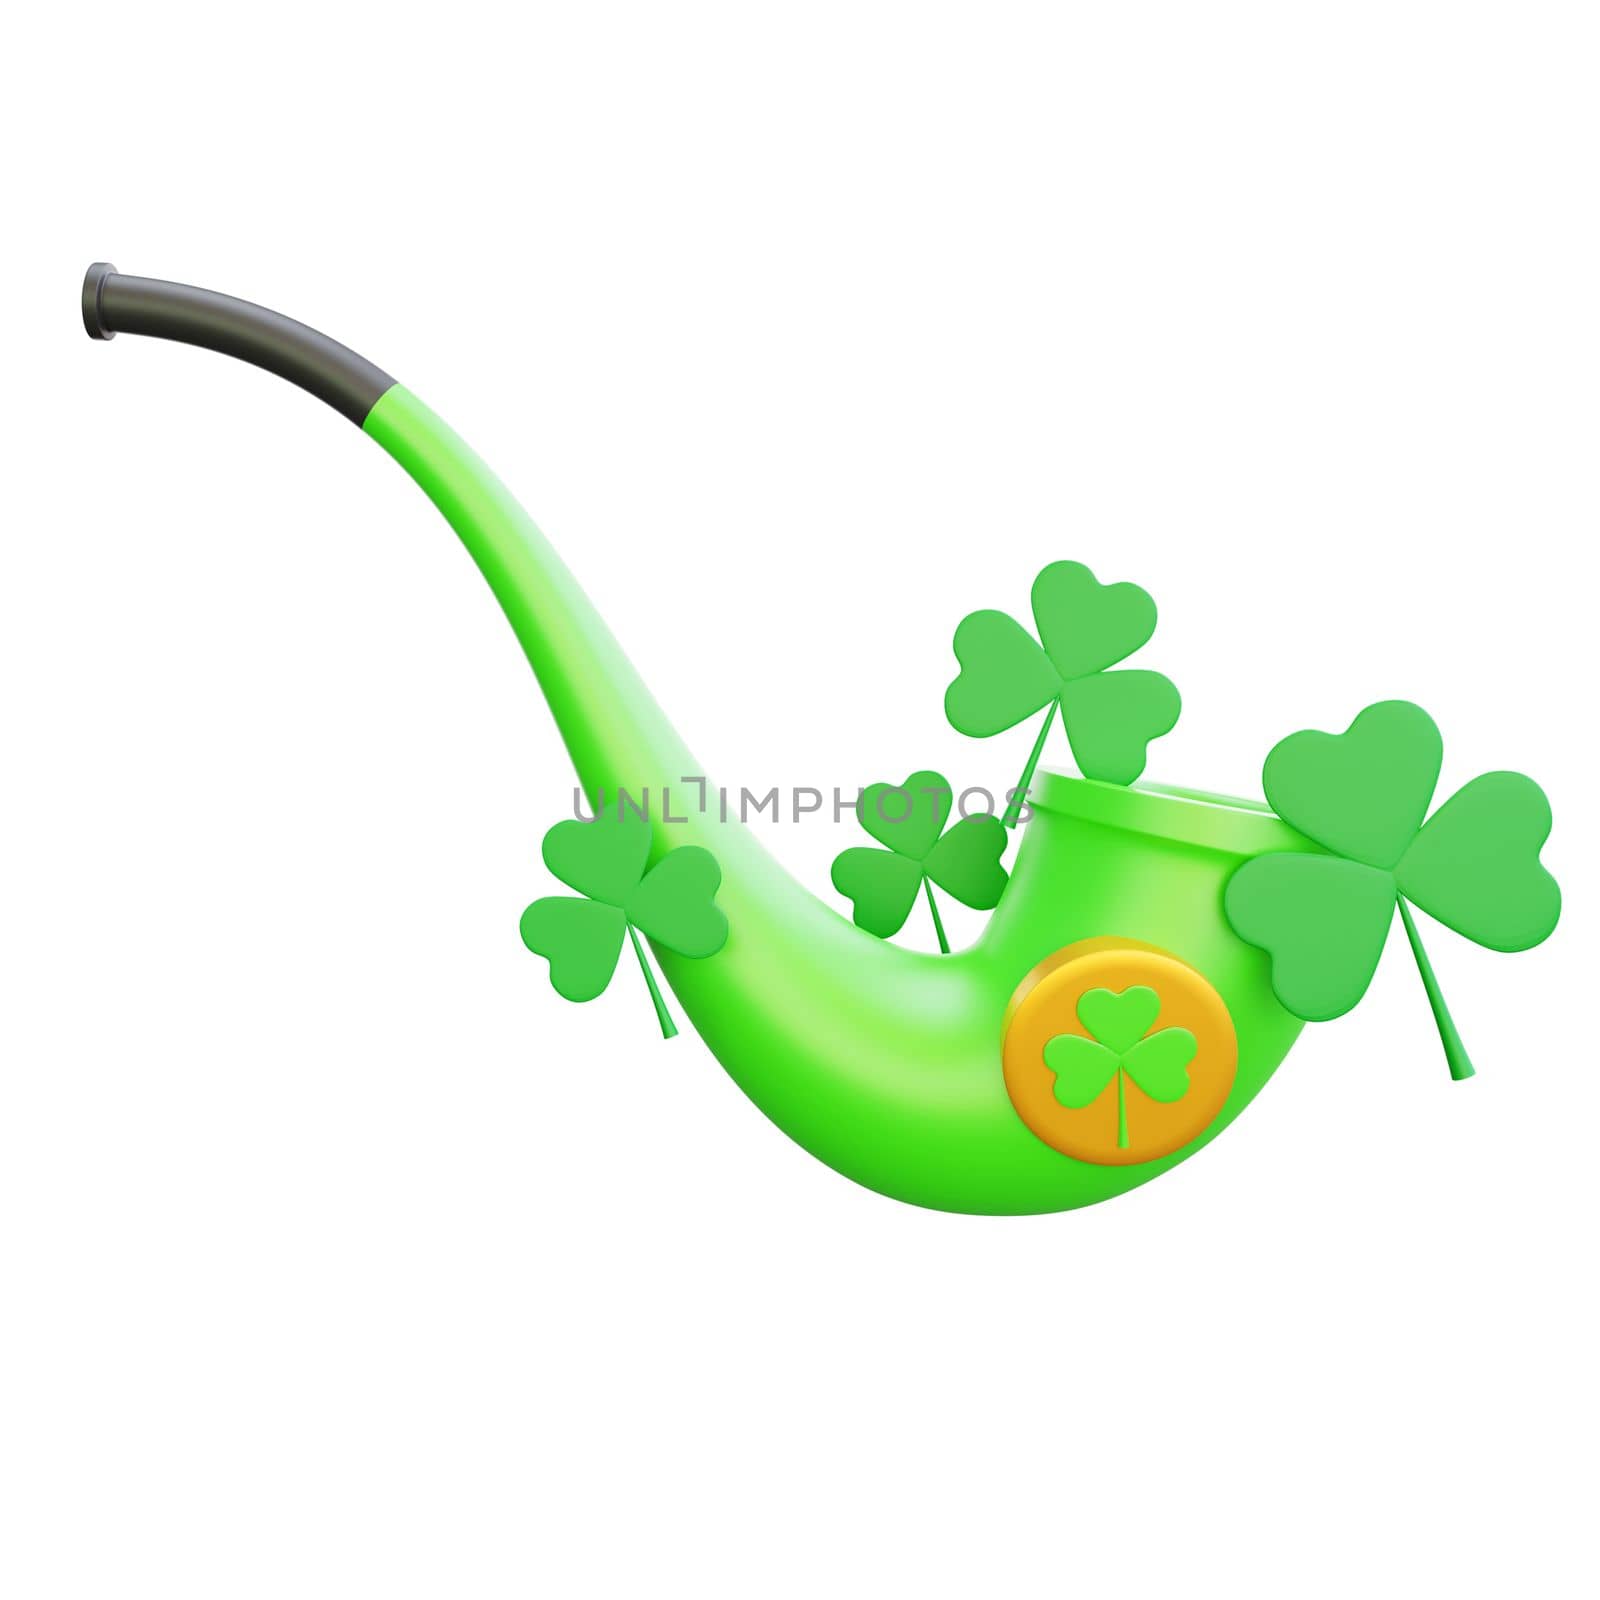 3d rendering of st patrick day smoking pipe icon